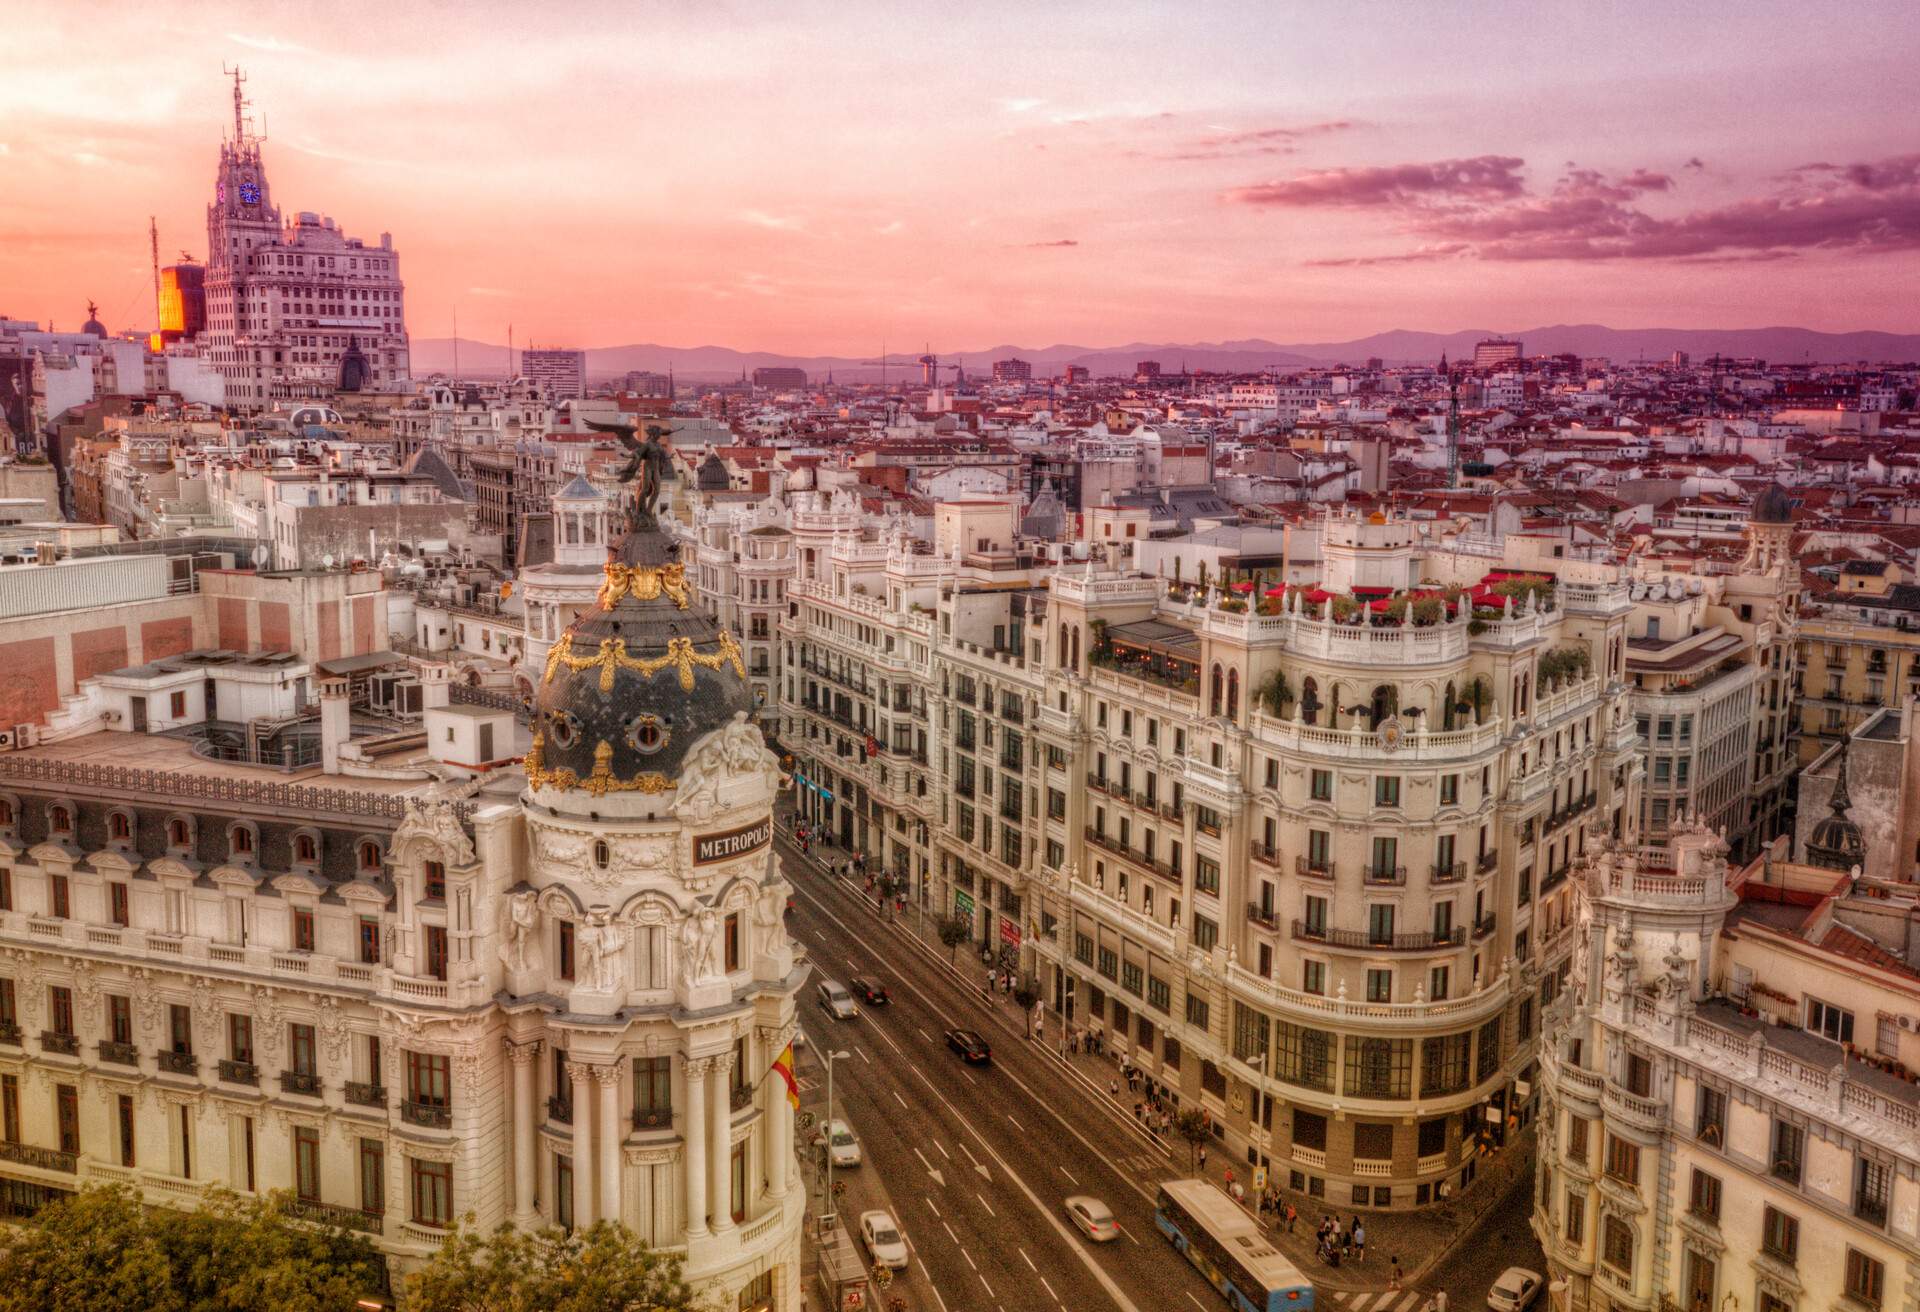 Gran Via street looks great from a higher point of view like this from a tourist roofs of the capital city of Spain.